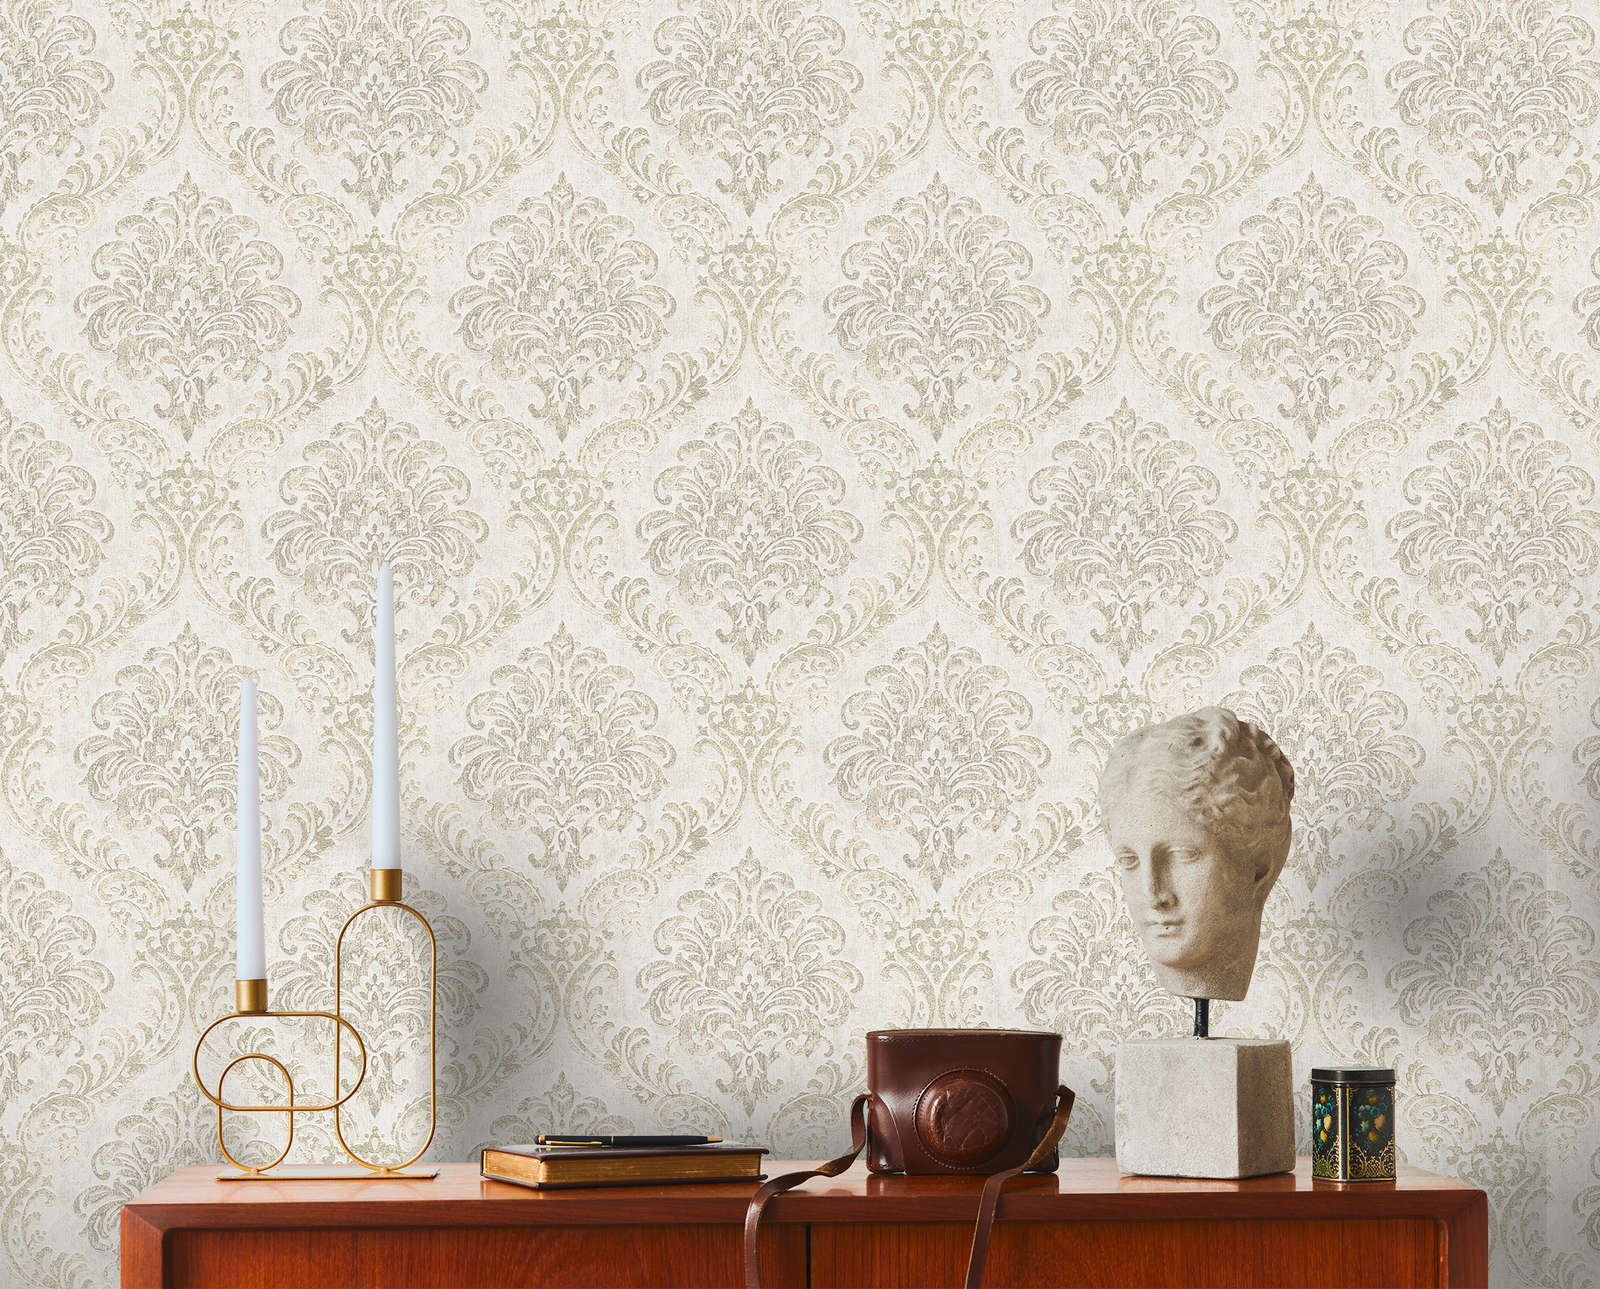             Baroque wallpaper with ornament & metallic look - white, silver, gold
        